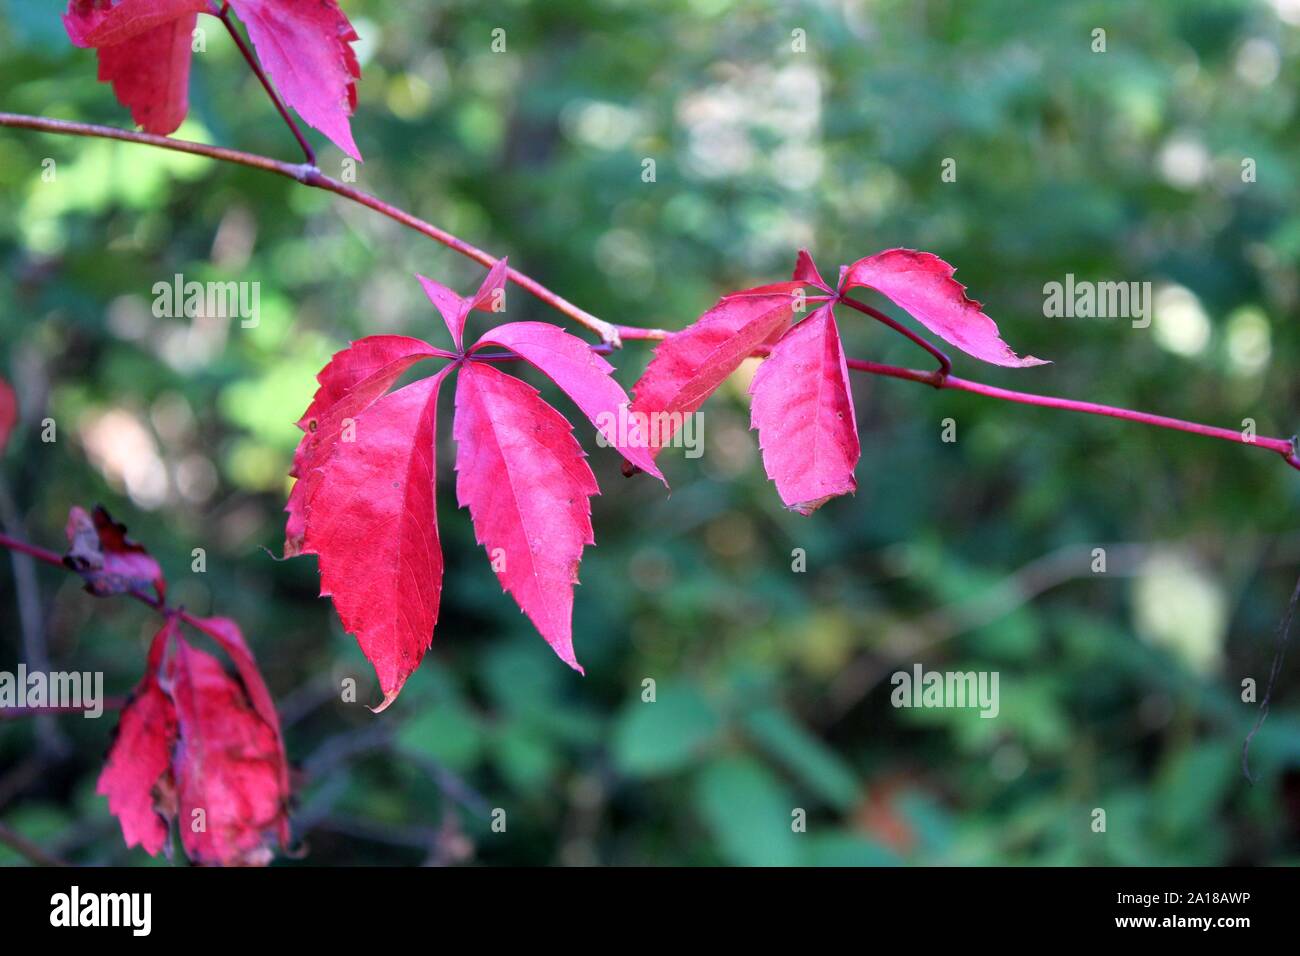 Bright Red Leaves of Virginia Creeper In A Green Forest Stock Photo